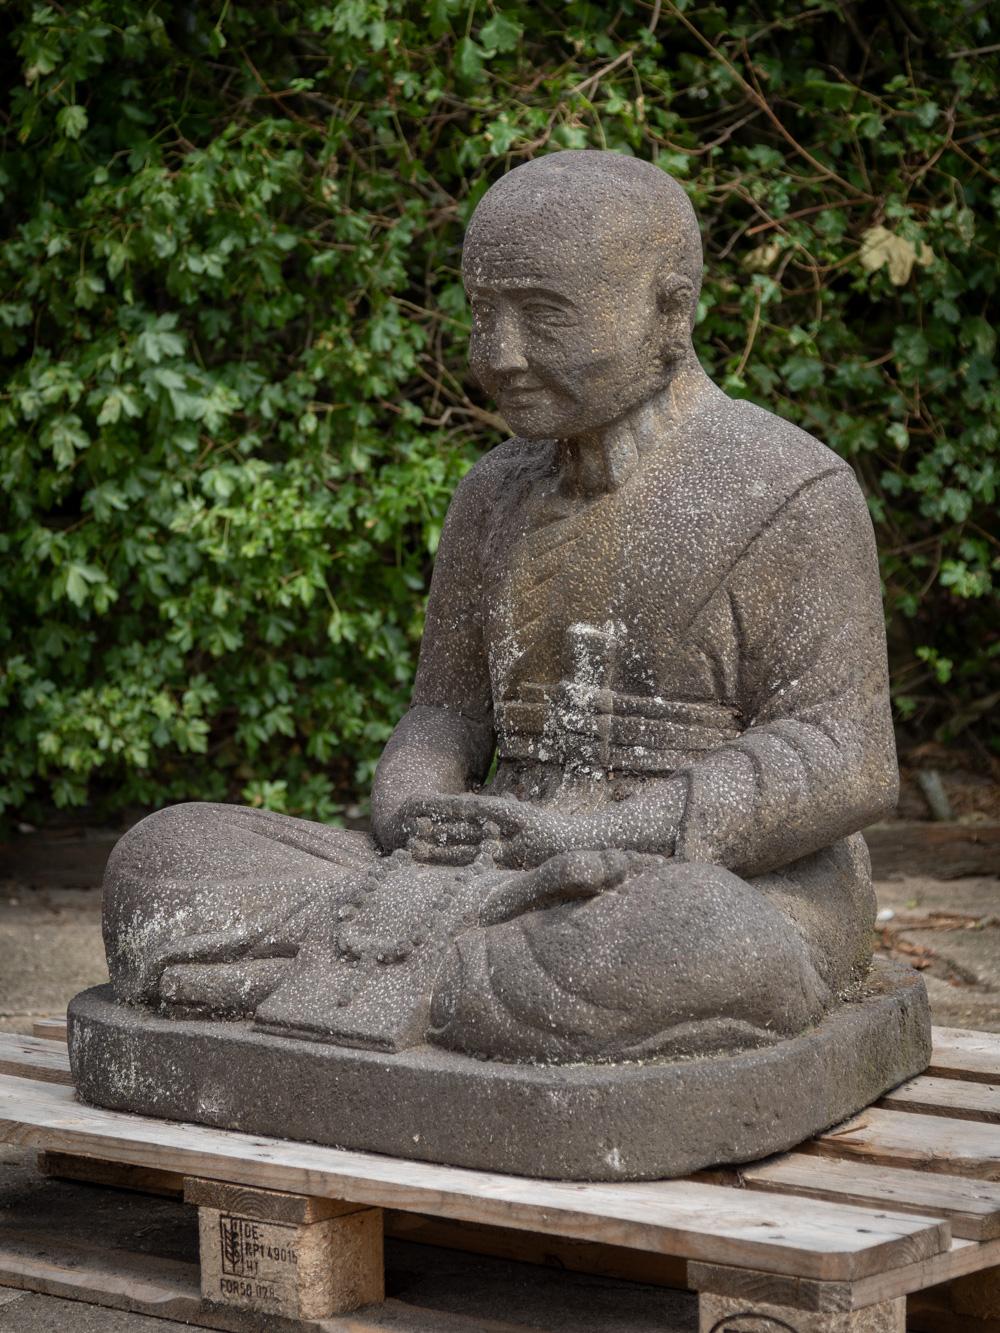 This old lavastone monk statue is a striking and substantial piece of art. Crafted from lavastone, it stands tall at 93 cm, with dimensions of 72 cm in width and 62 cm in depth. Its estimated weight is around 250 kg, showcasing the solid and